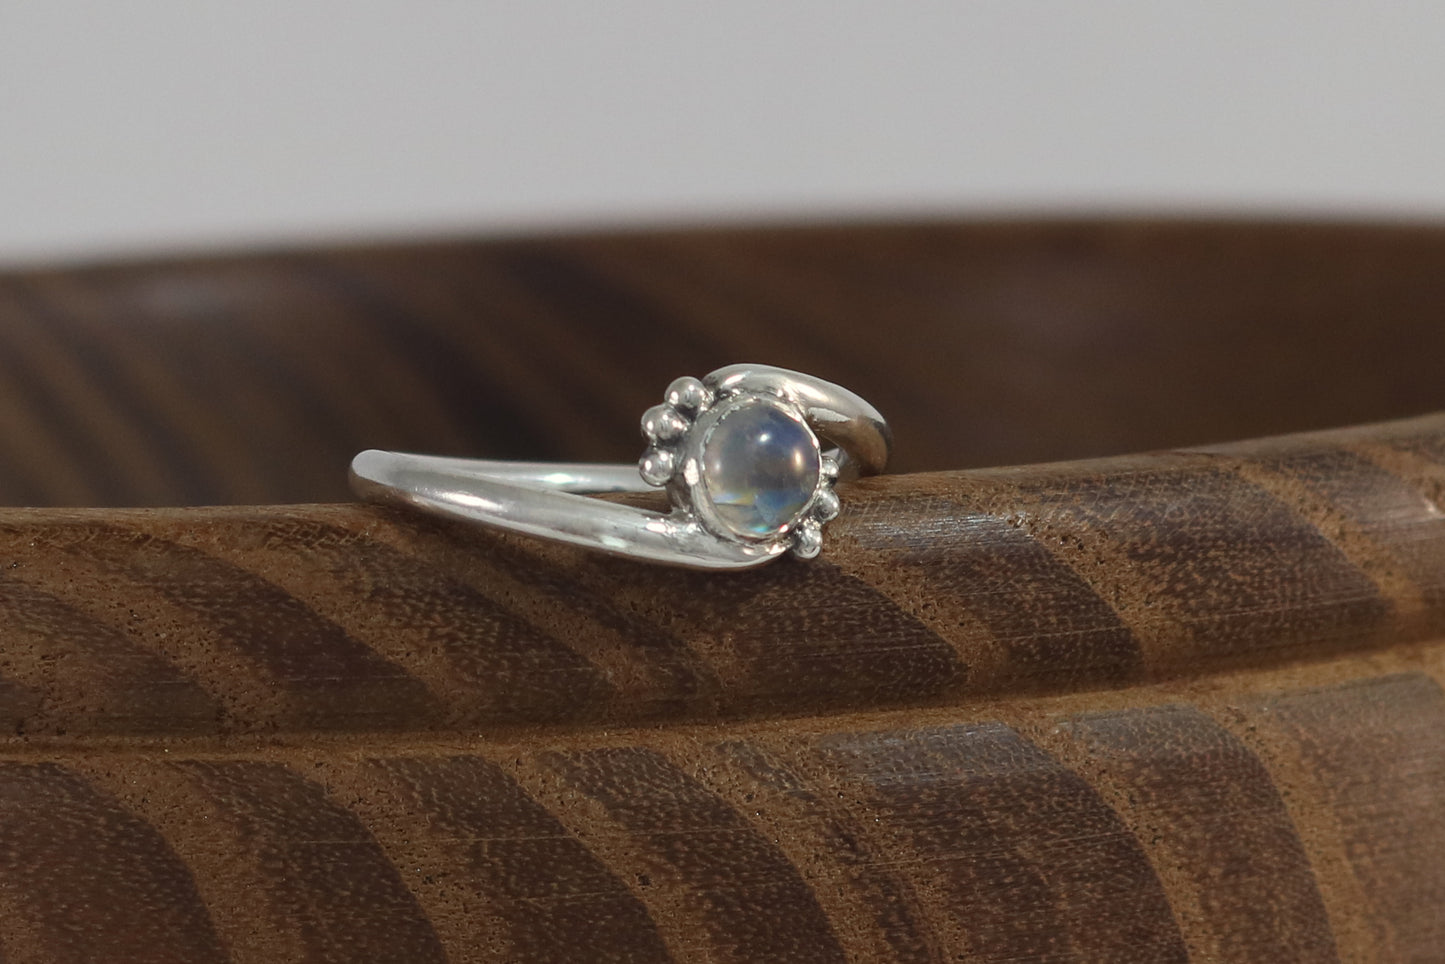 Round natural rainbow moonstone set in sterling silver bezel on a bypass ring band with silver bubble accents. 